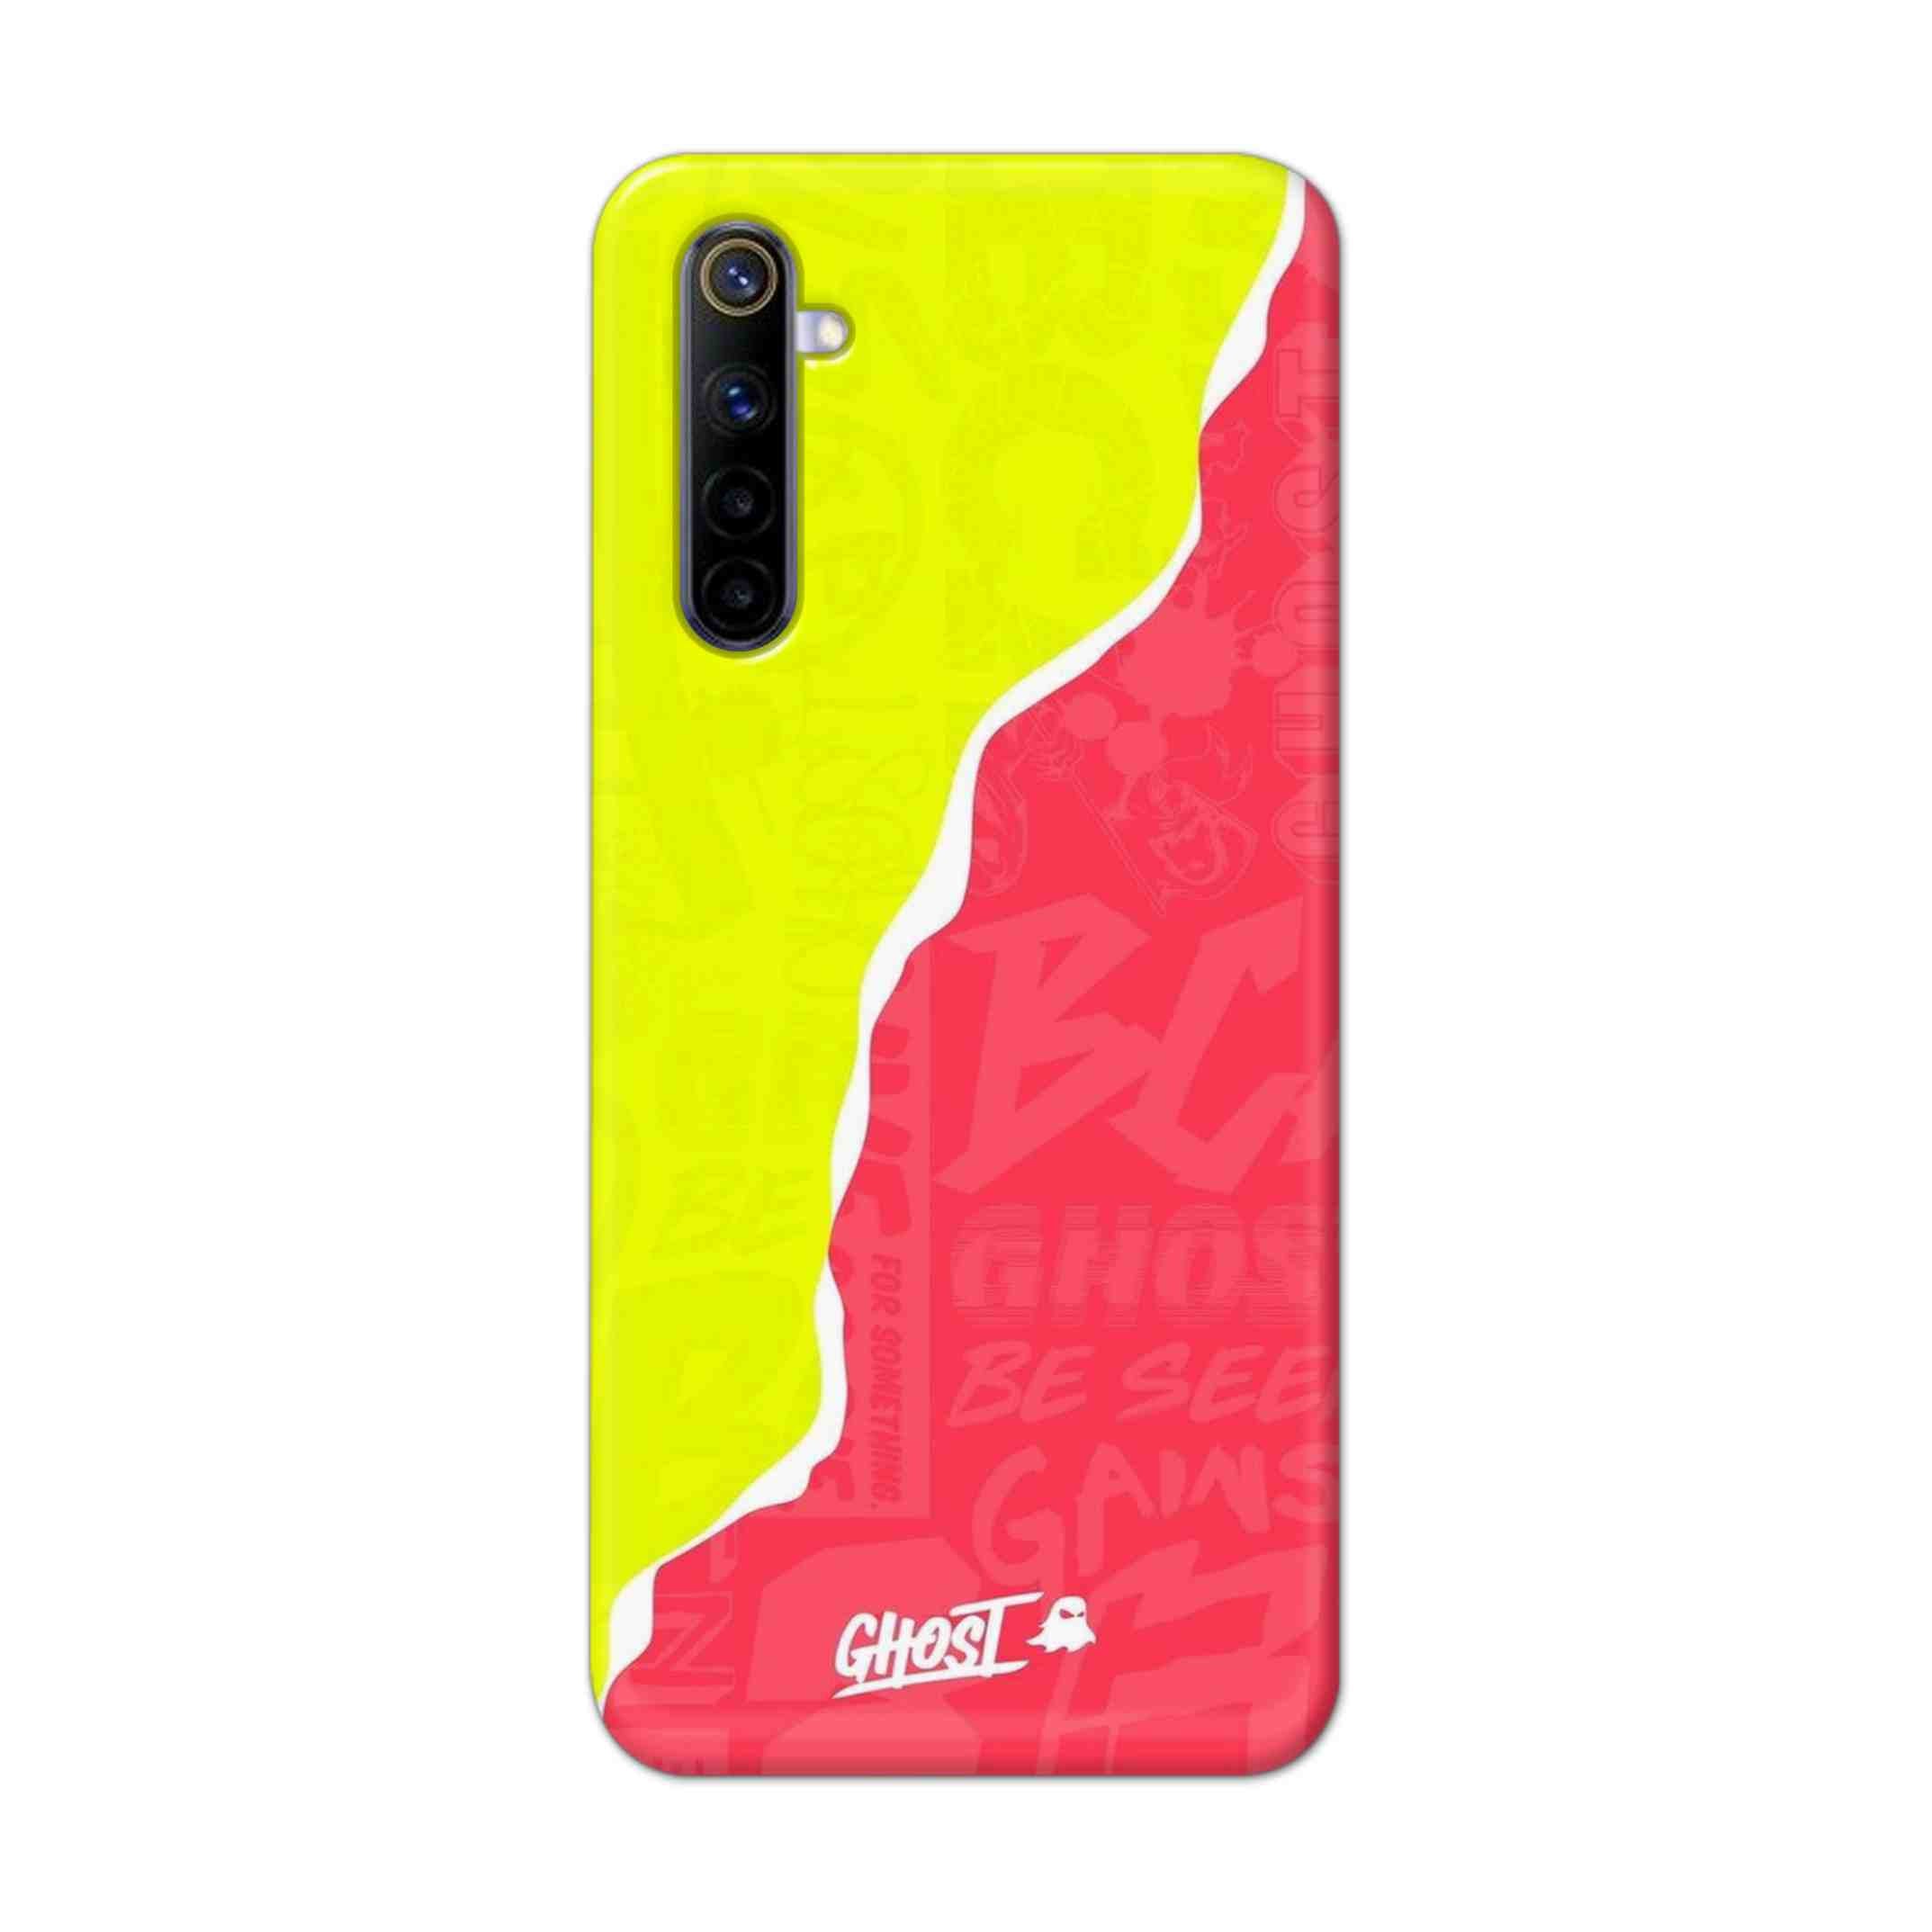 Buy Ghost Hard Back Mobile Phone Case Cover For REALME 6 PRO Online